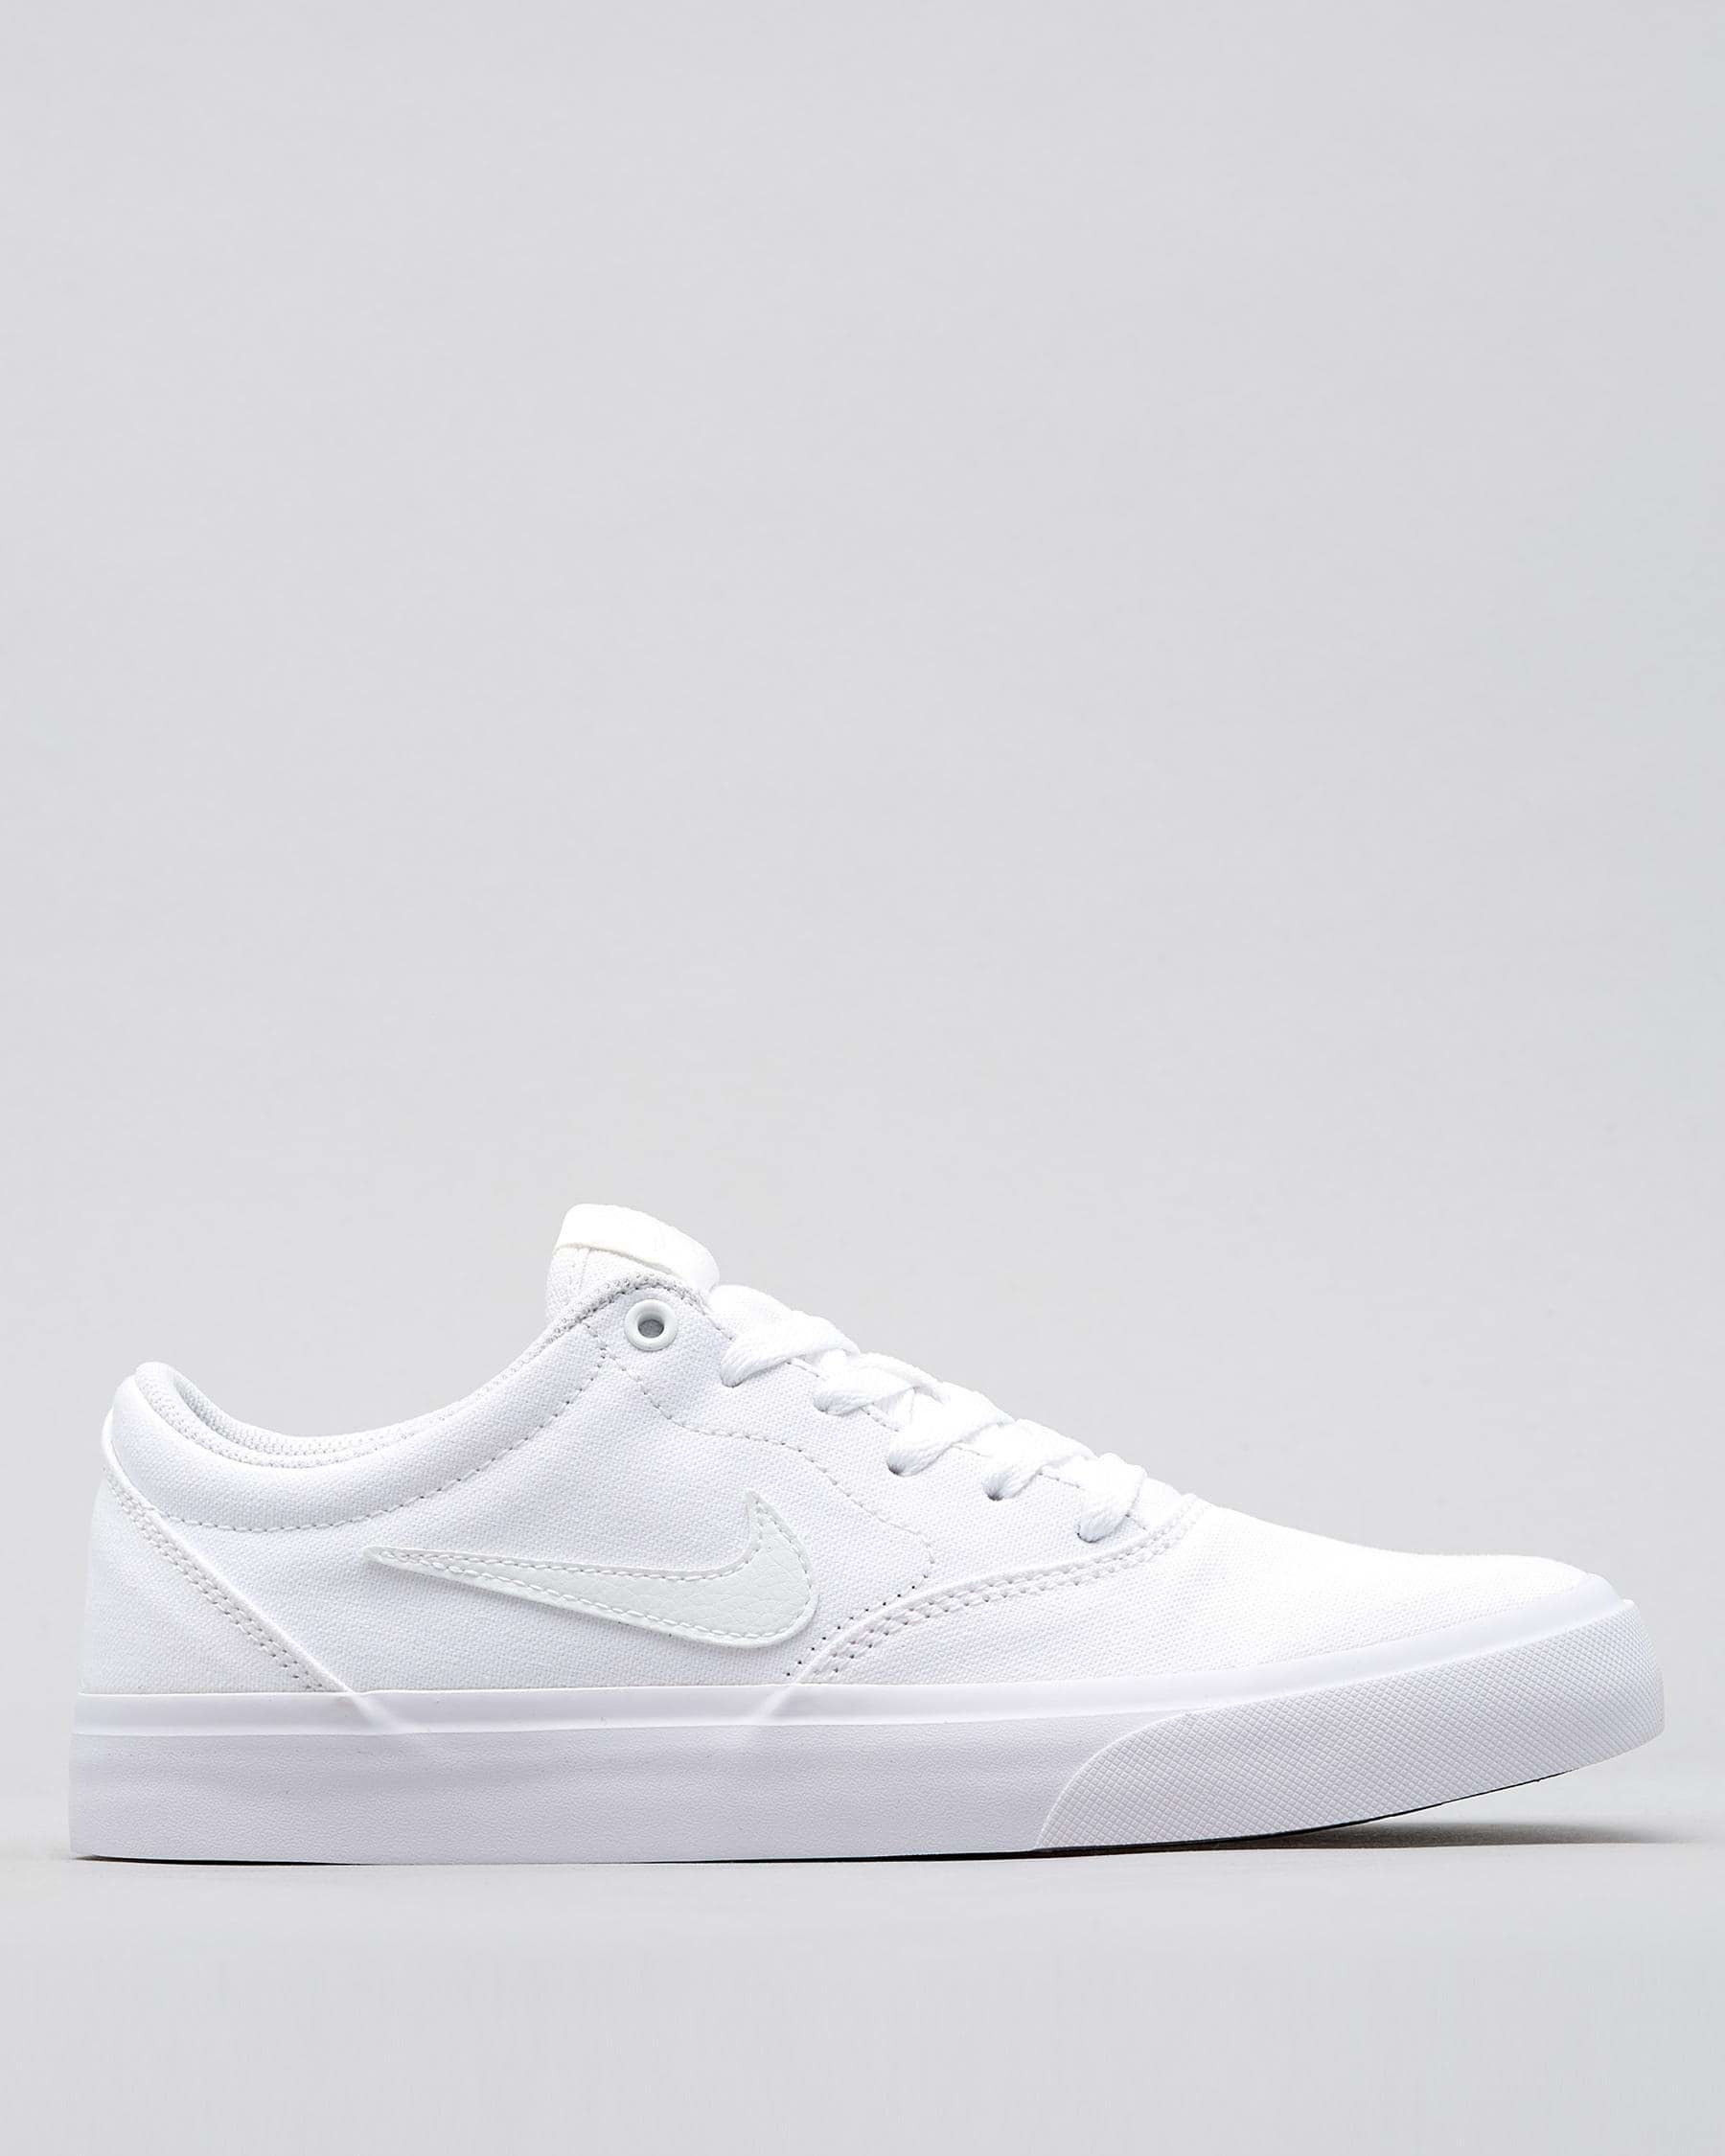 Shop Nike Womens SB Charge Canvas Shoes In White/white/white - Fast ...